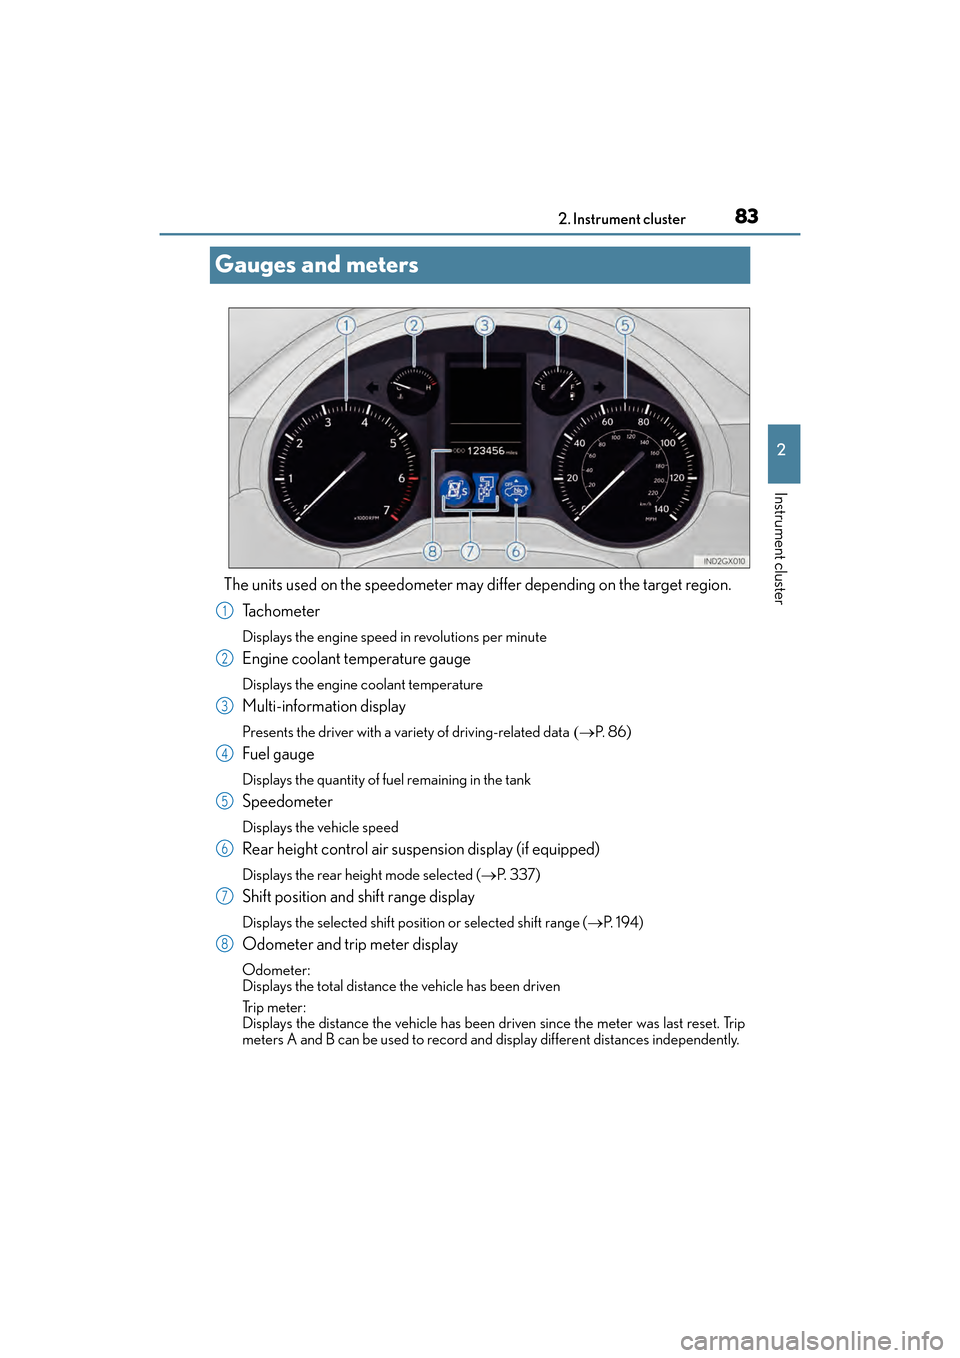 Lexus GX460 2017  Owners Manual 83
GX 460 _O M_ OM6 0F 6 8U _(U )2. Instrument cluster
2
Instrument cluster
Gauges and meters
The units used on the speedometer may di
ffer depending on the target region.
Ta c h o m e t e r
Displays 